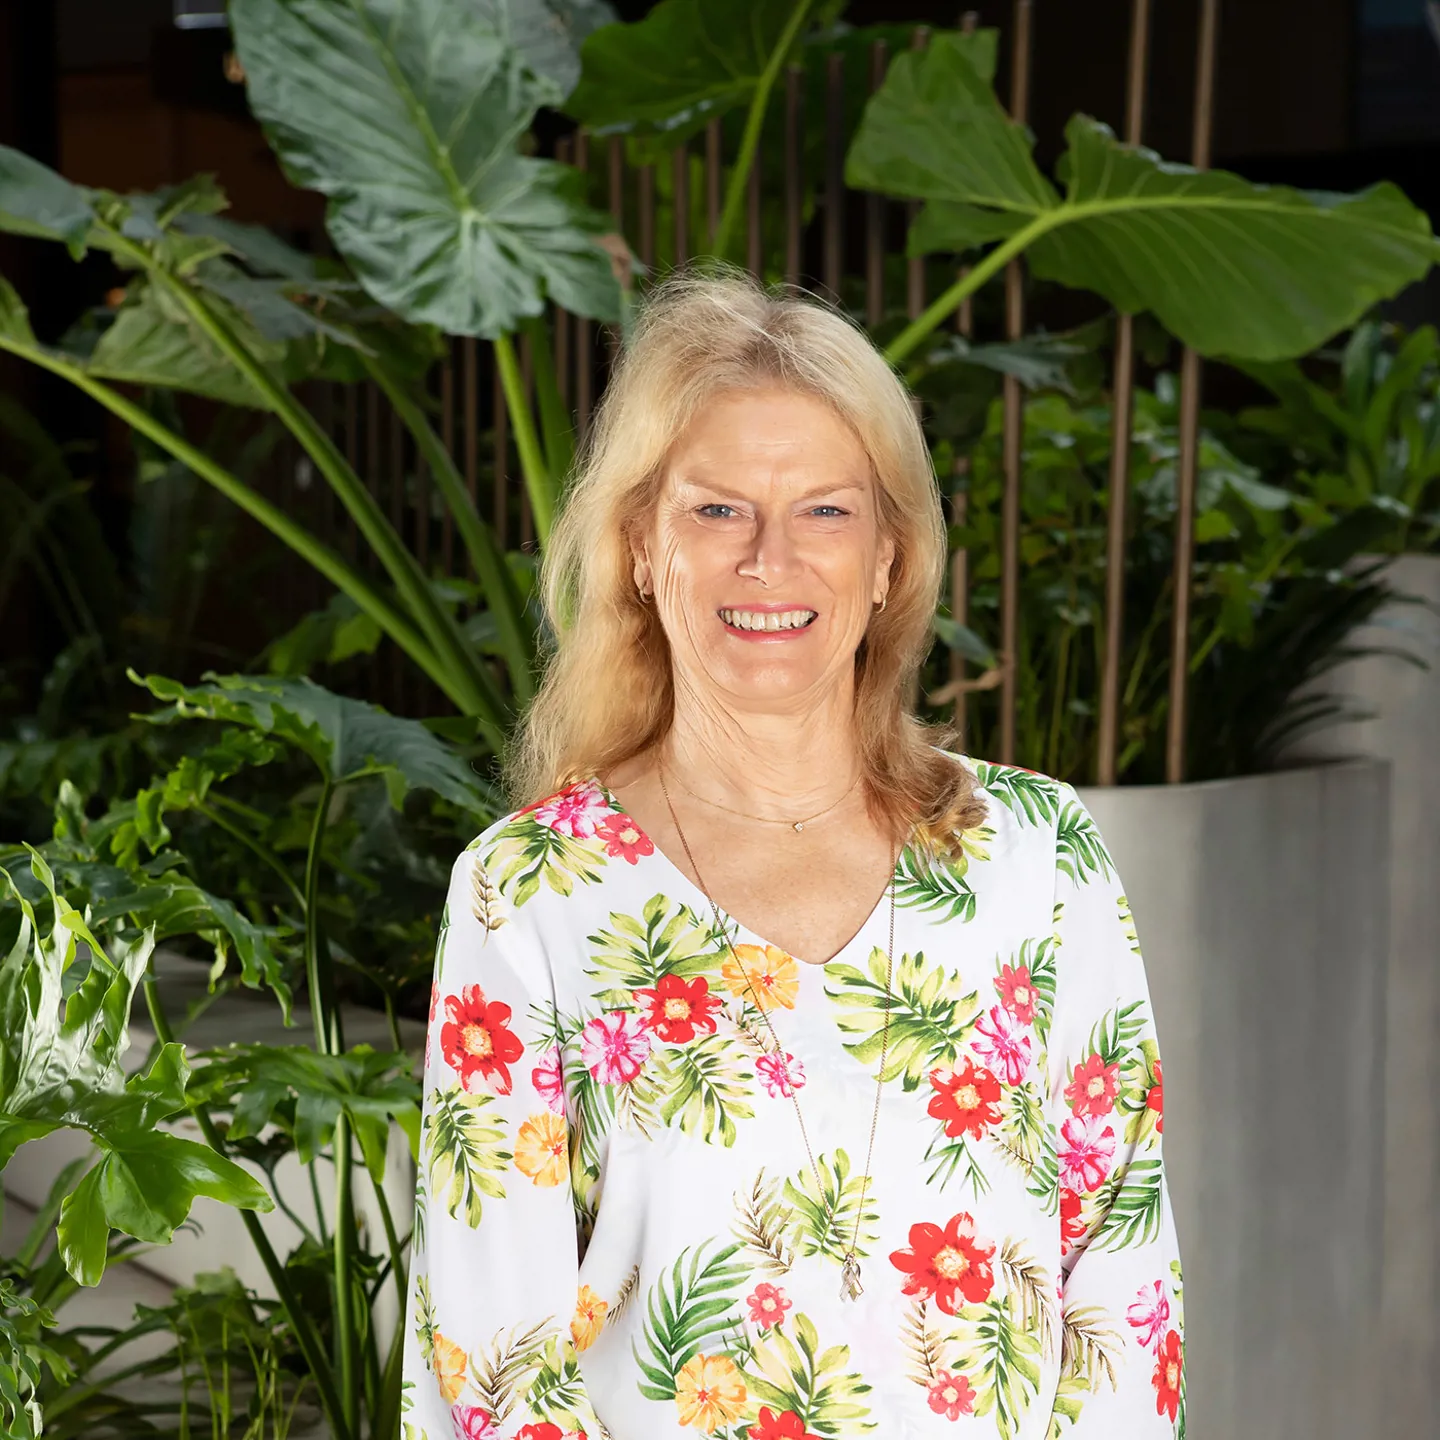 Woman with a floral shirt standing in front of plants